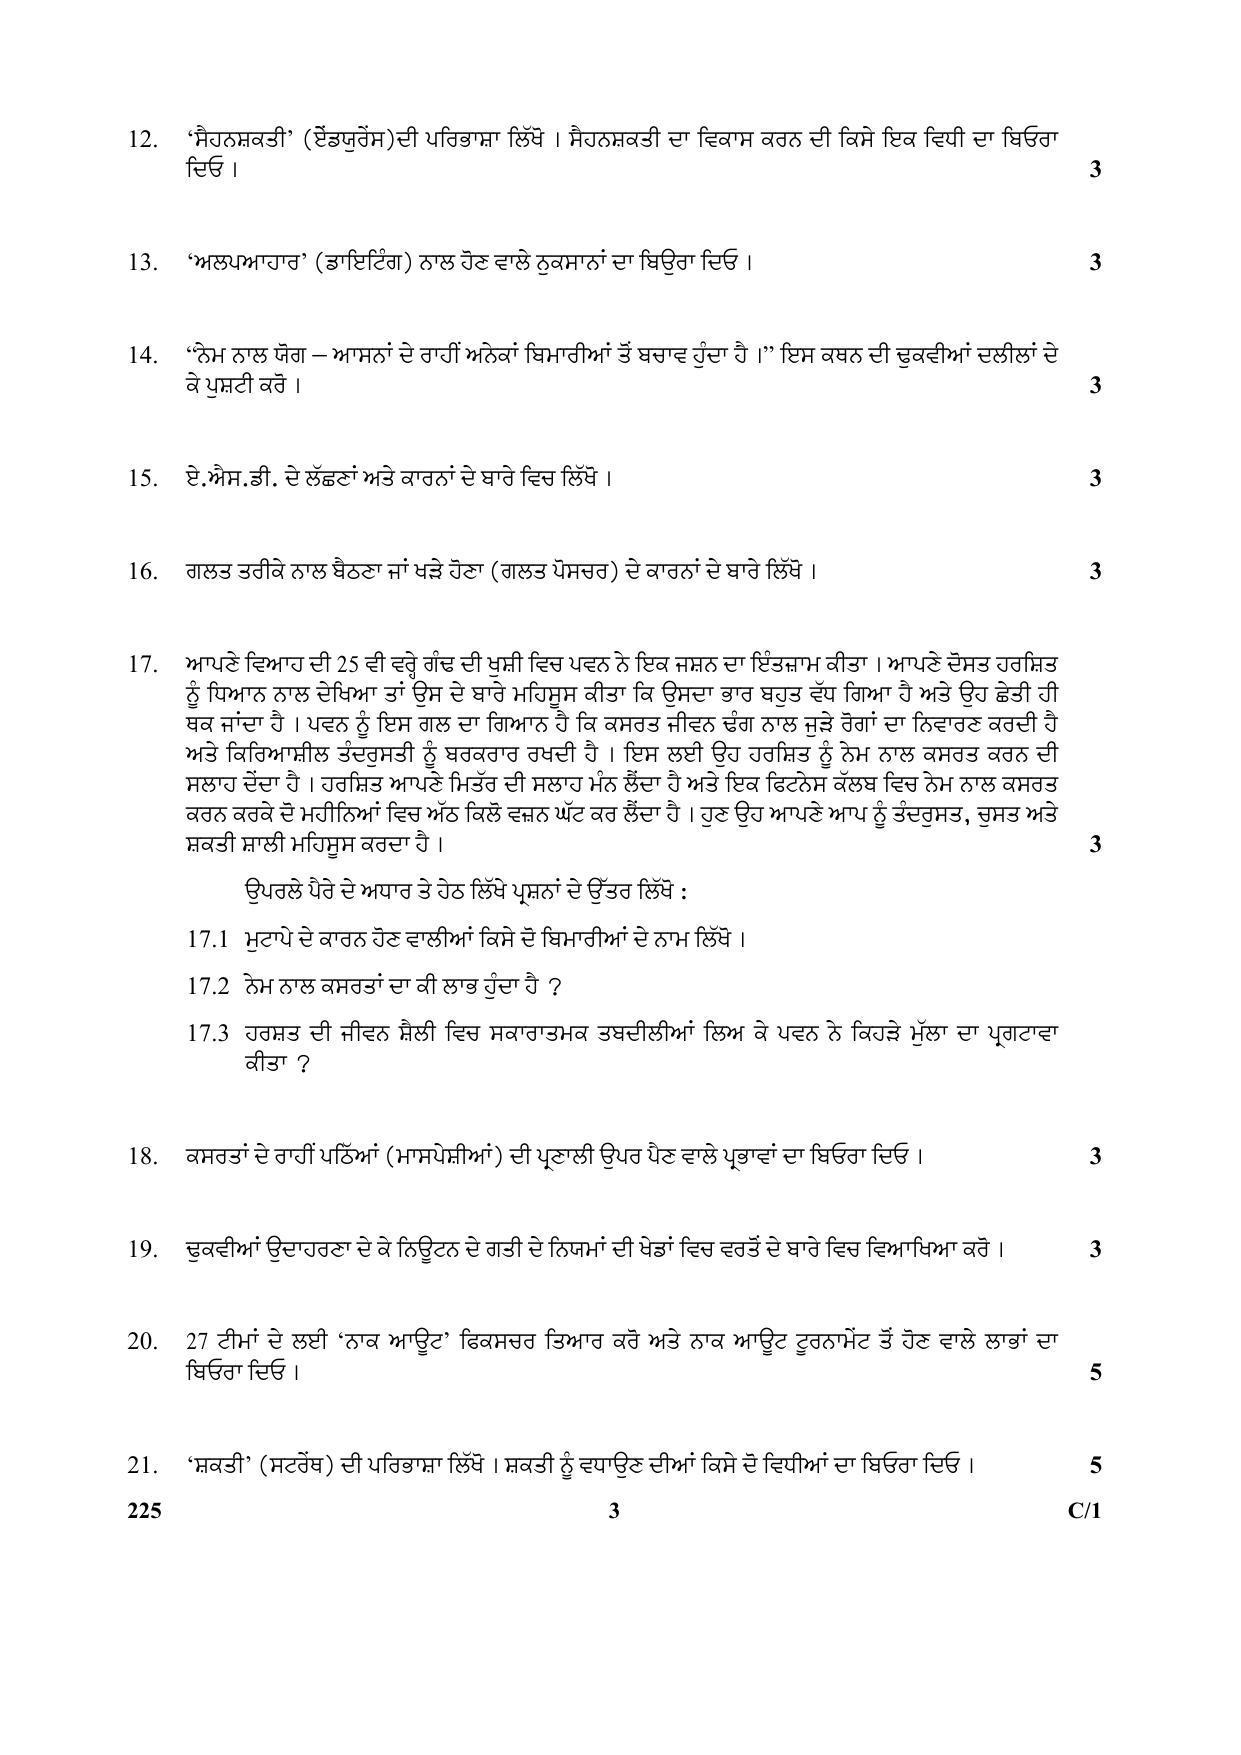 CBSE Class 12 225 & 75 (Physical Education Theory) 2018 Compartment Question Paper - Page 3